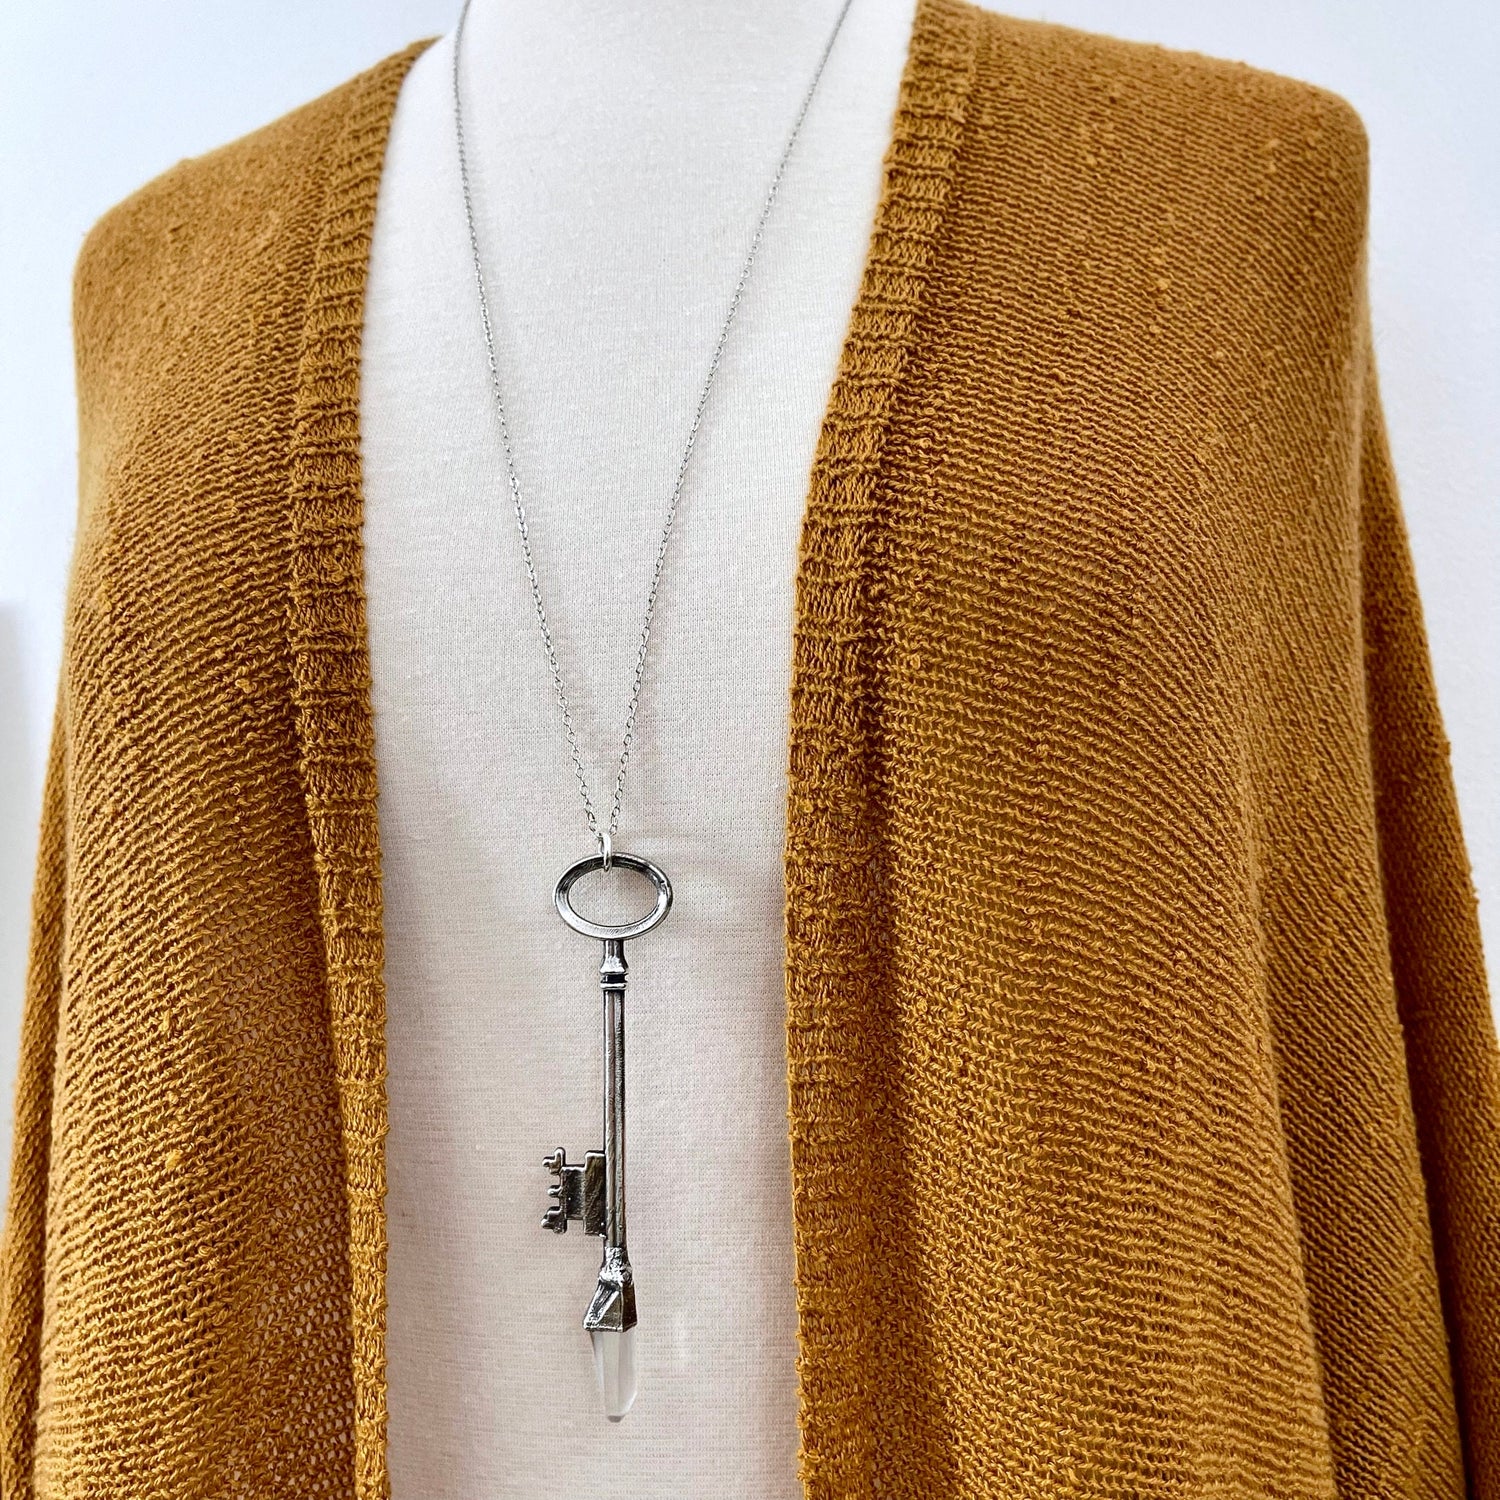 Raw Clear Quartz Crystal Vintage Skeleton Key Necklace Pendant in Fine Silver / Foxlark Collection - One of a Kind